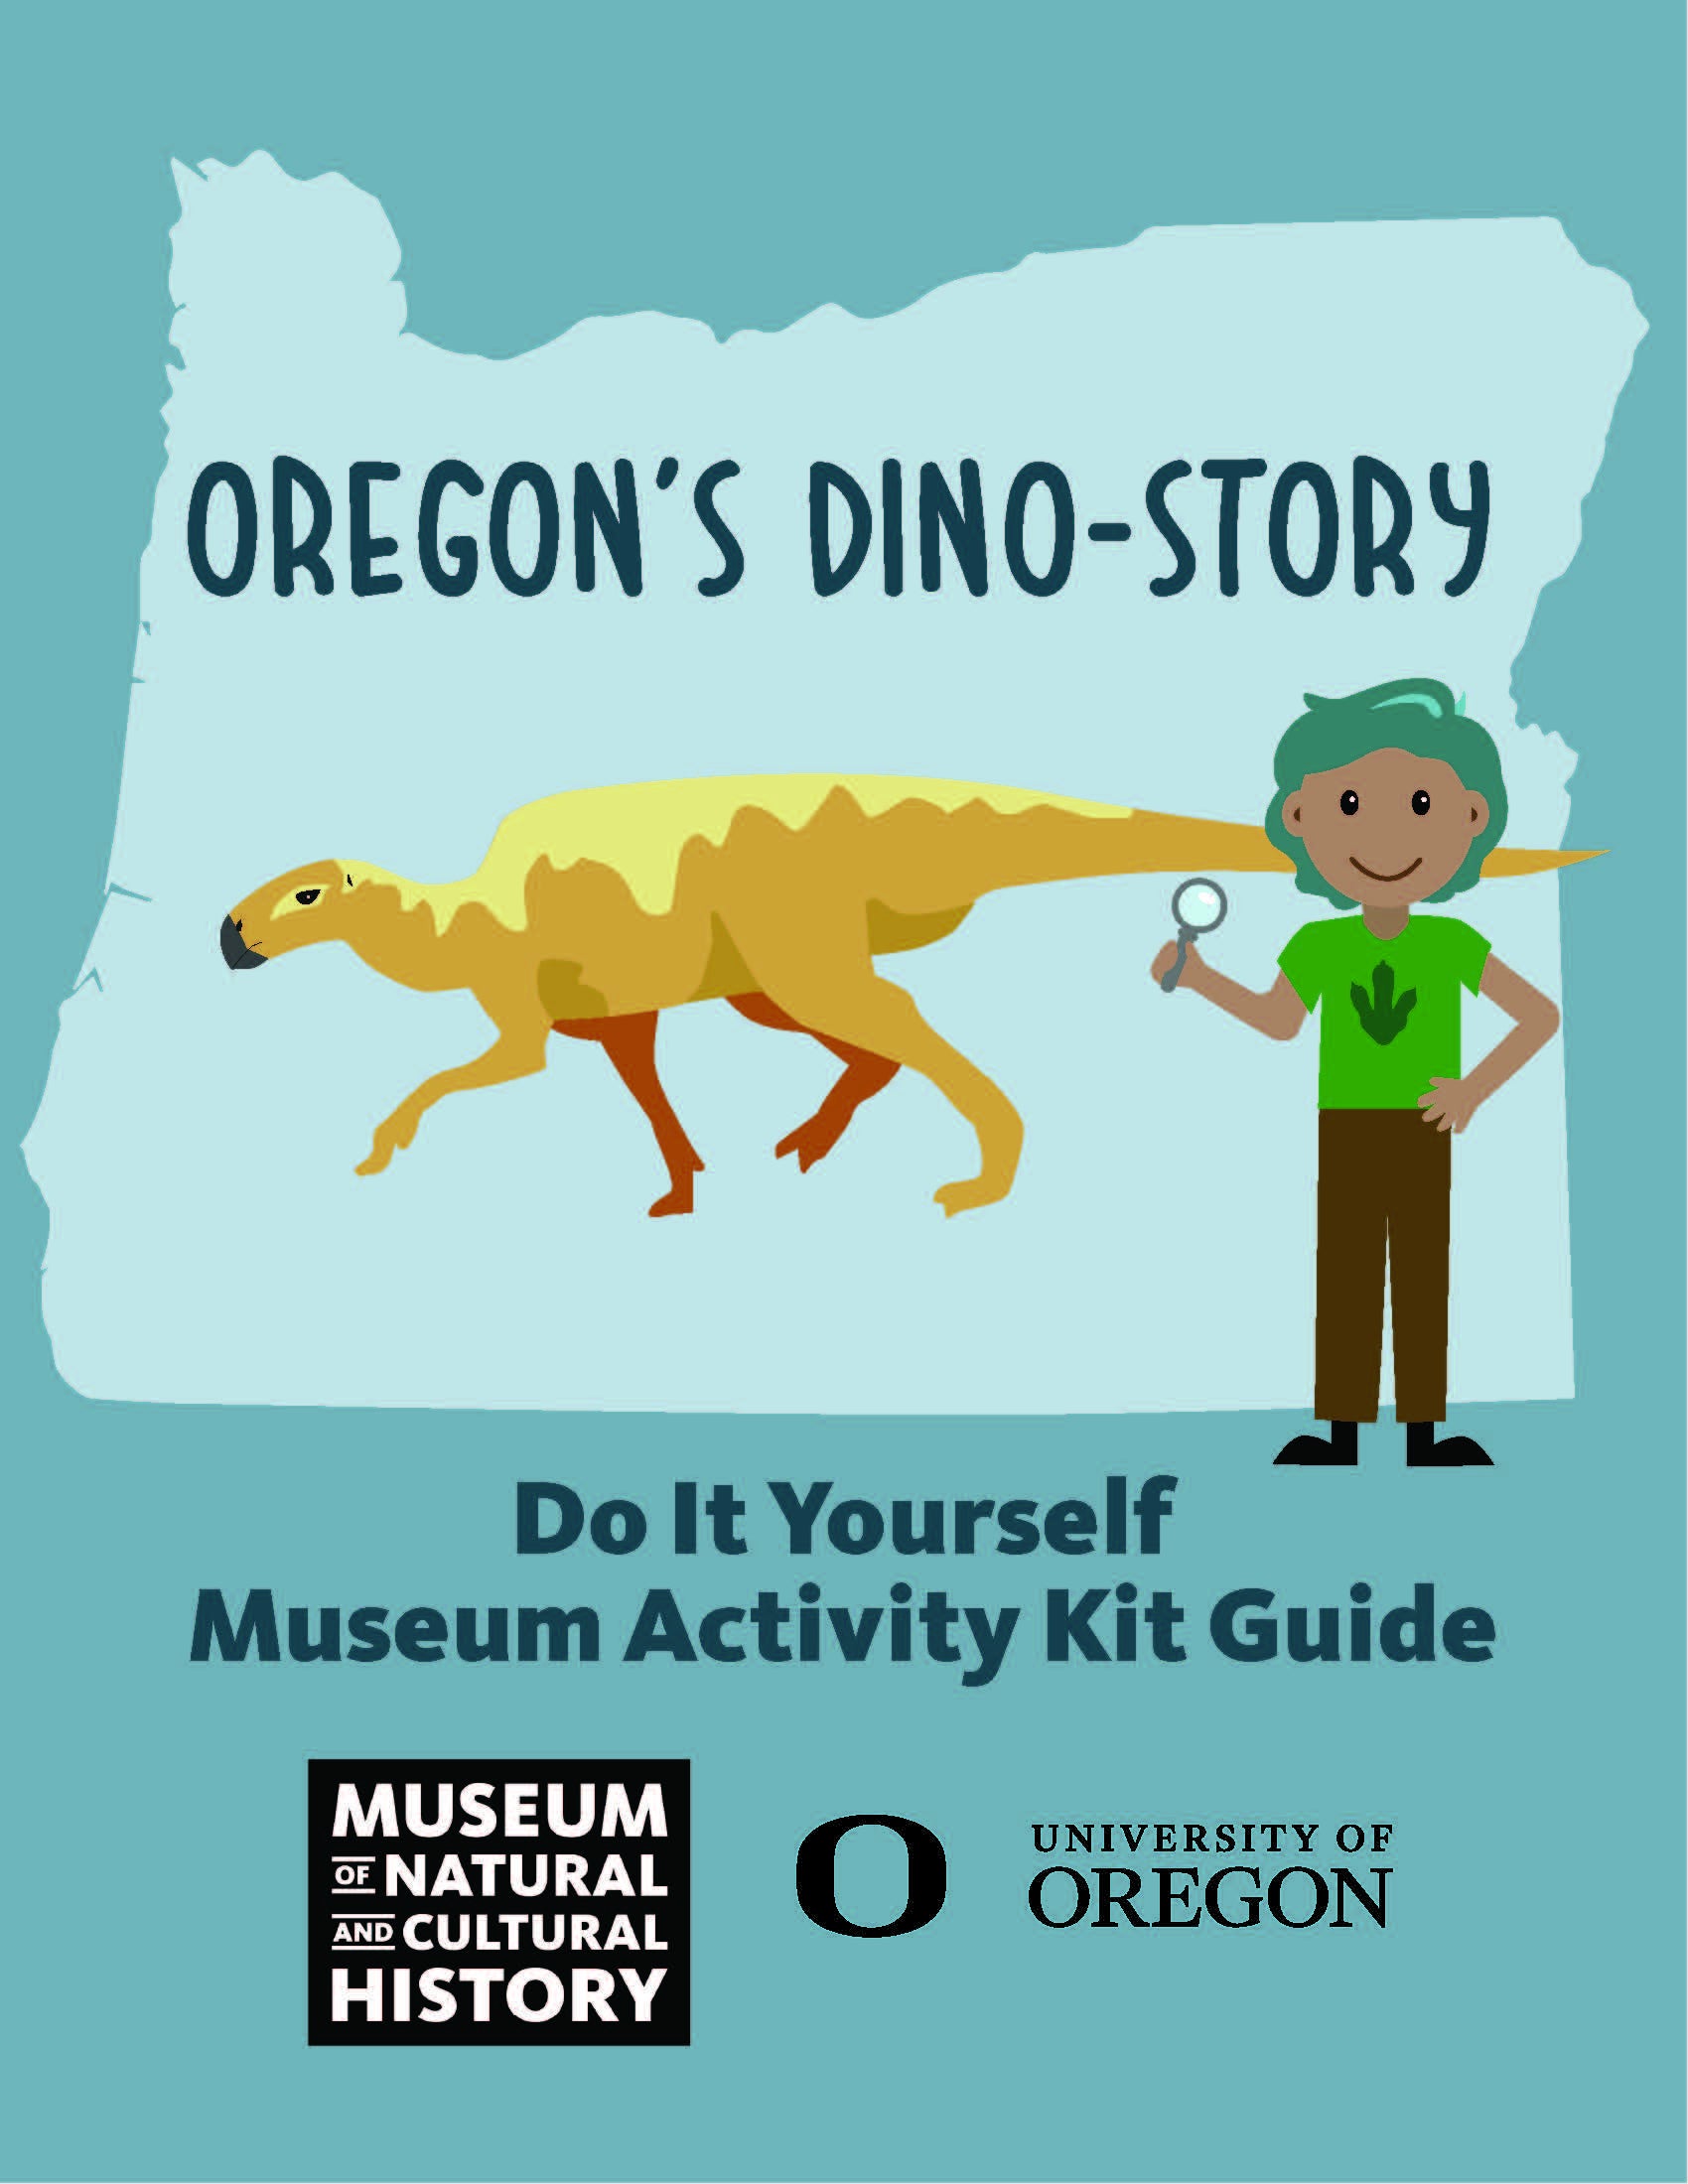 Outline of Oregon with a dinosaur and a person in front.